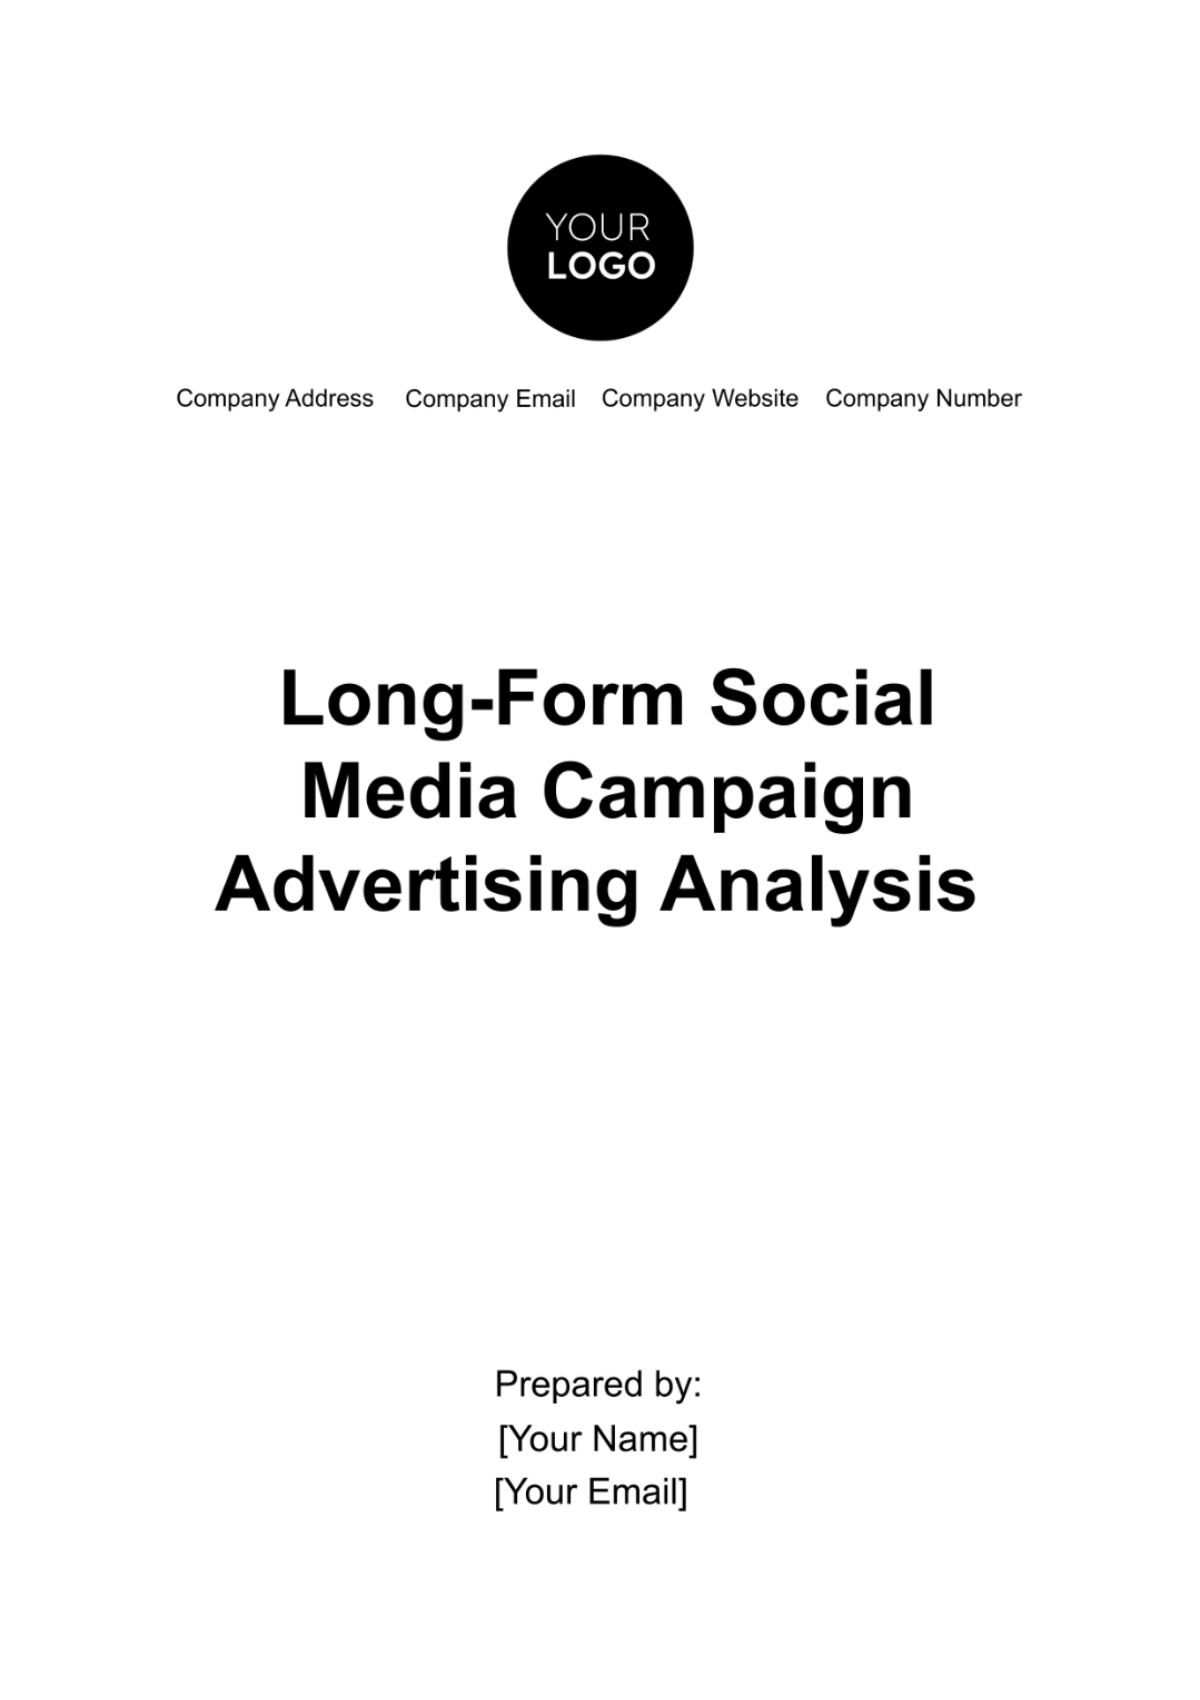 Long-Form Social Media Campaign Advertising Analysis Template